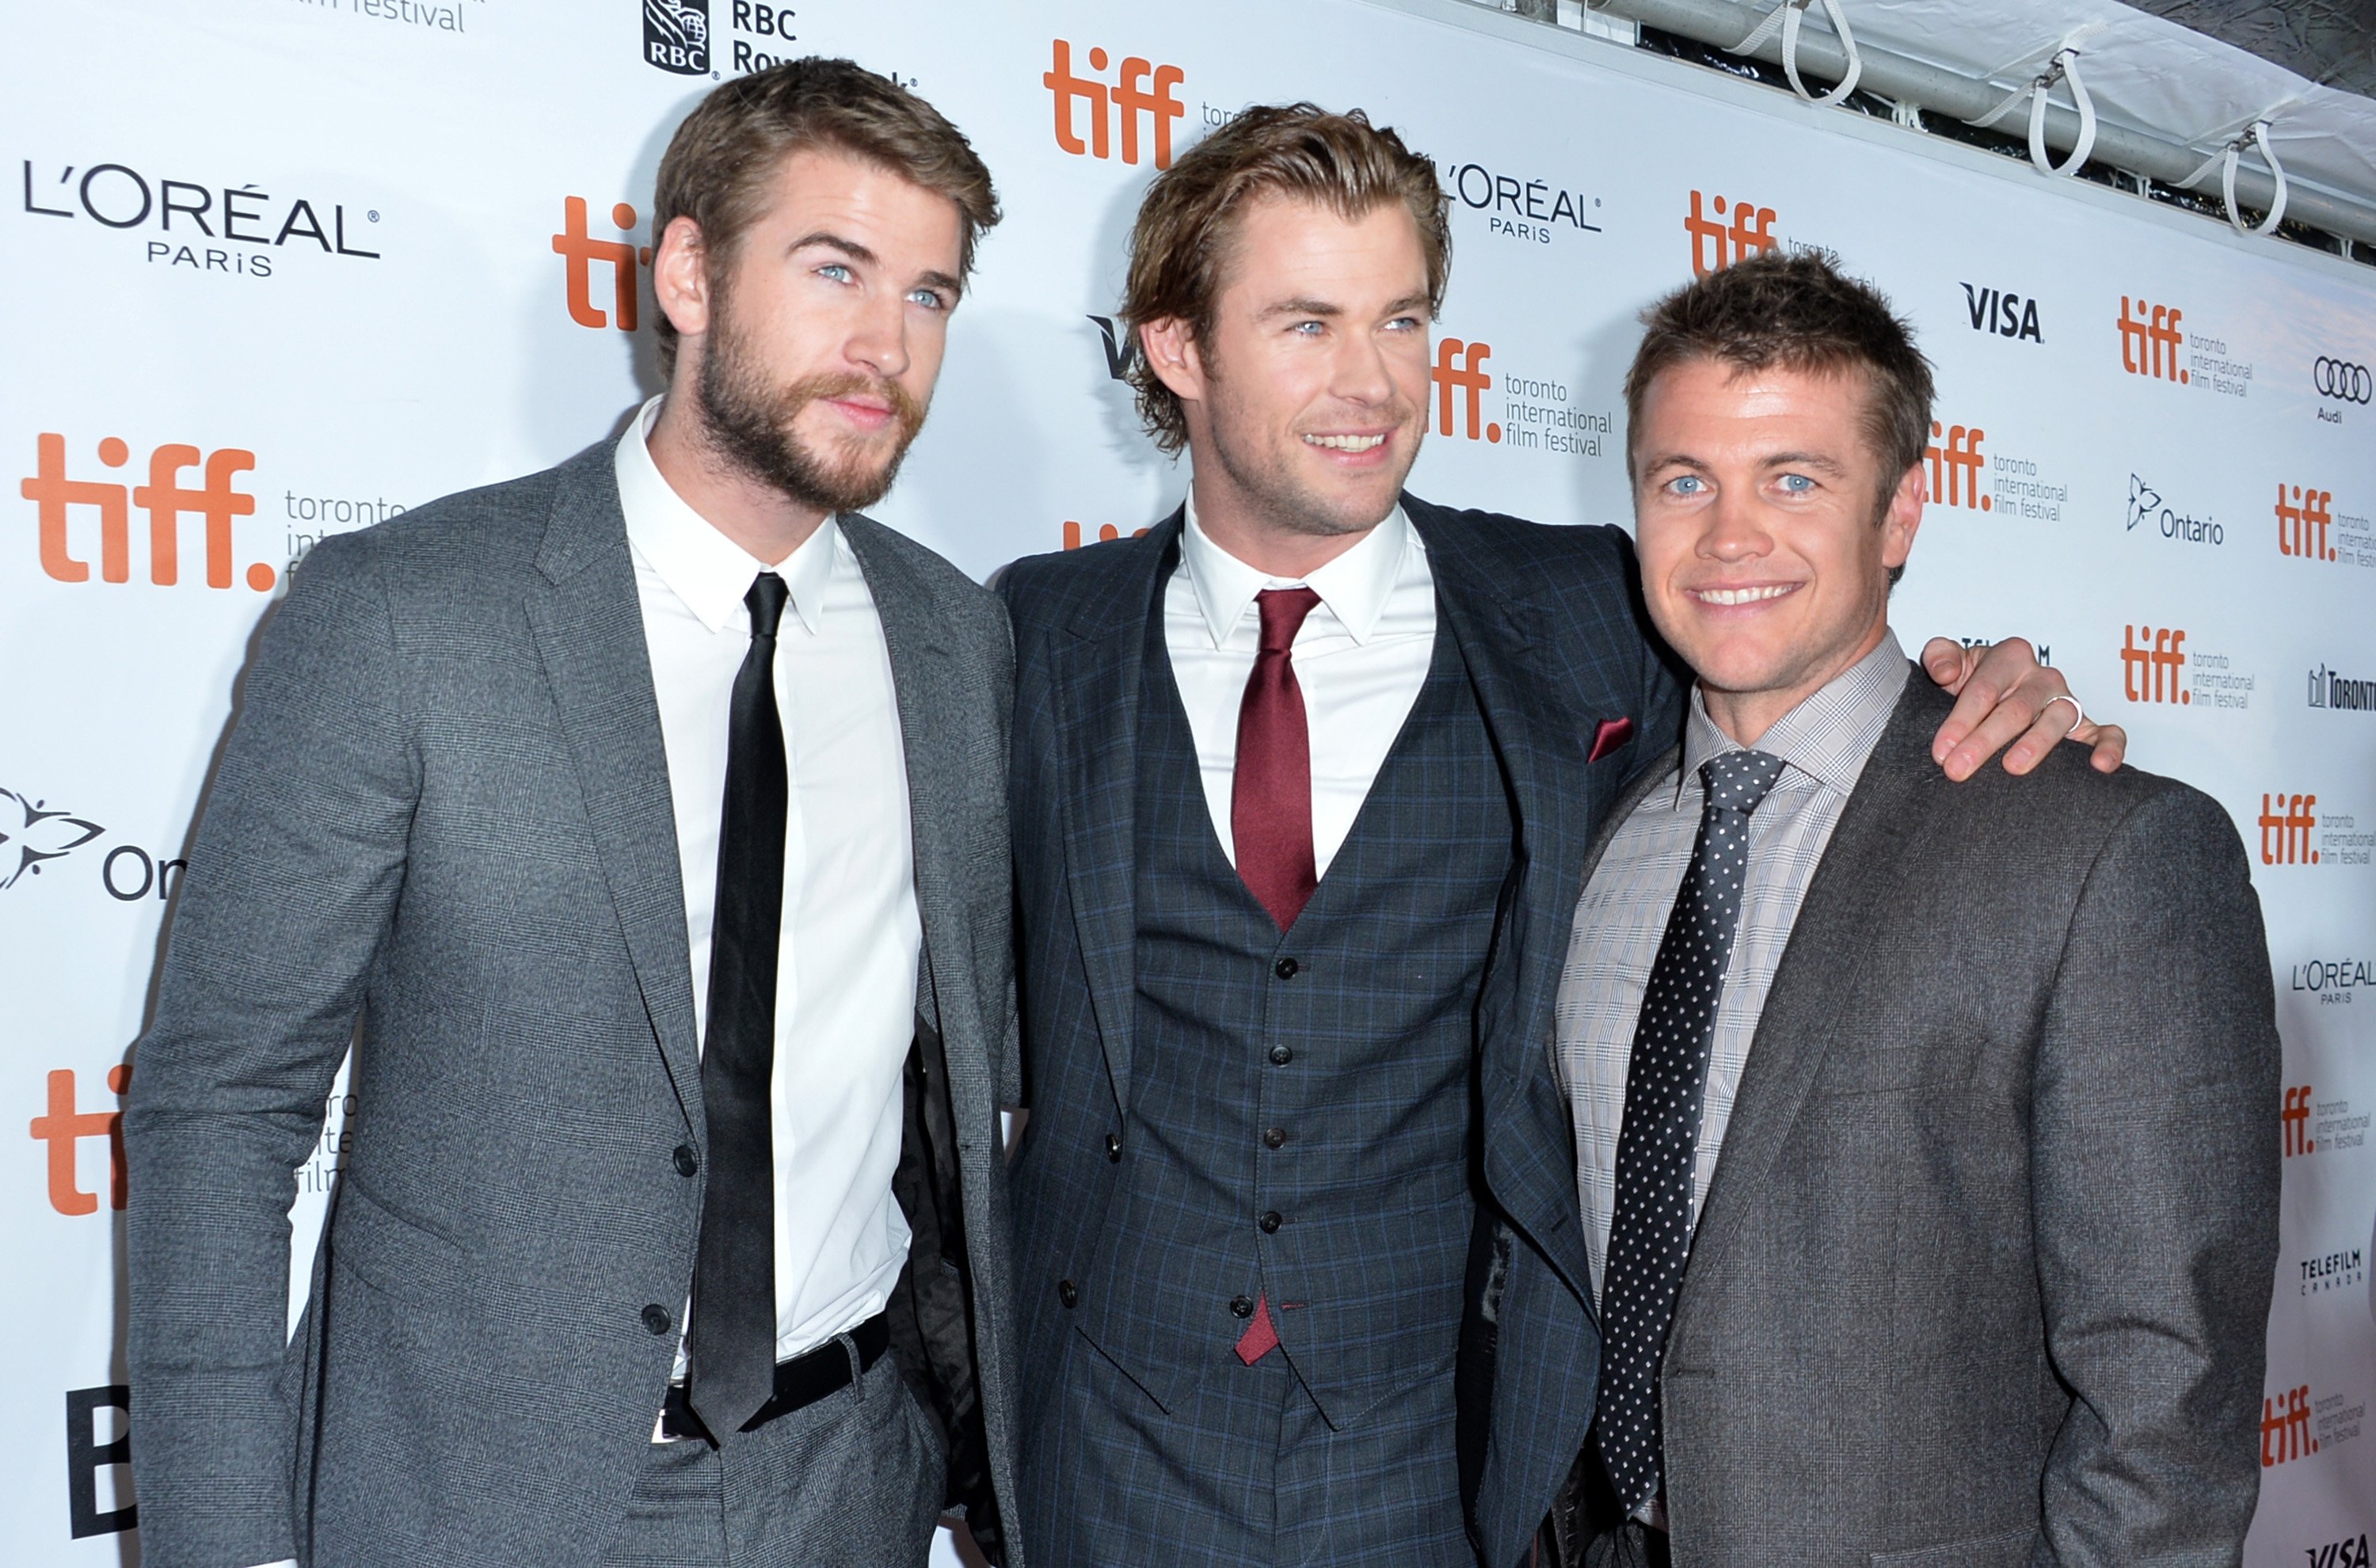 Liam,Chris and Luke Hemsworth attend the "Rush" premiere during the 2013 Toronto International Film Festival at Roy Thomson Hall on September 8, 2013, in Toronto, Canada. | Source: Getty Images.